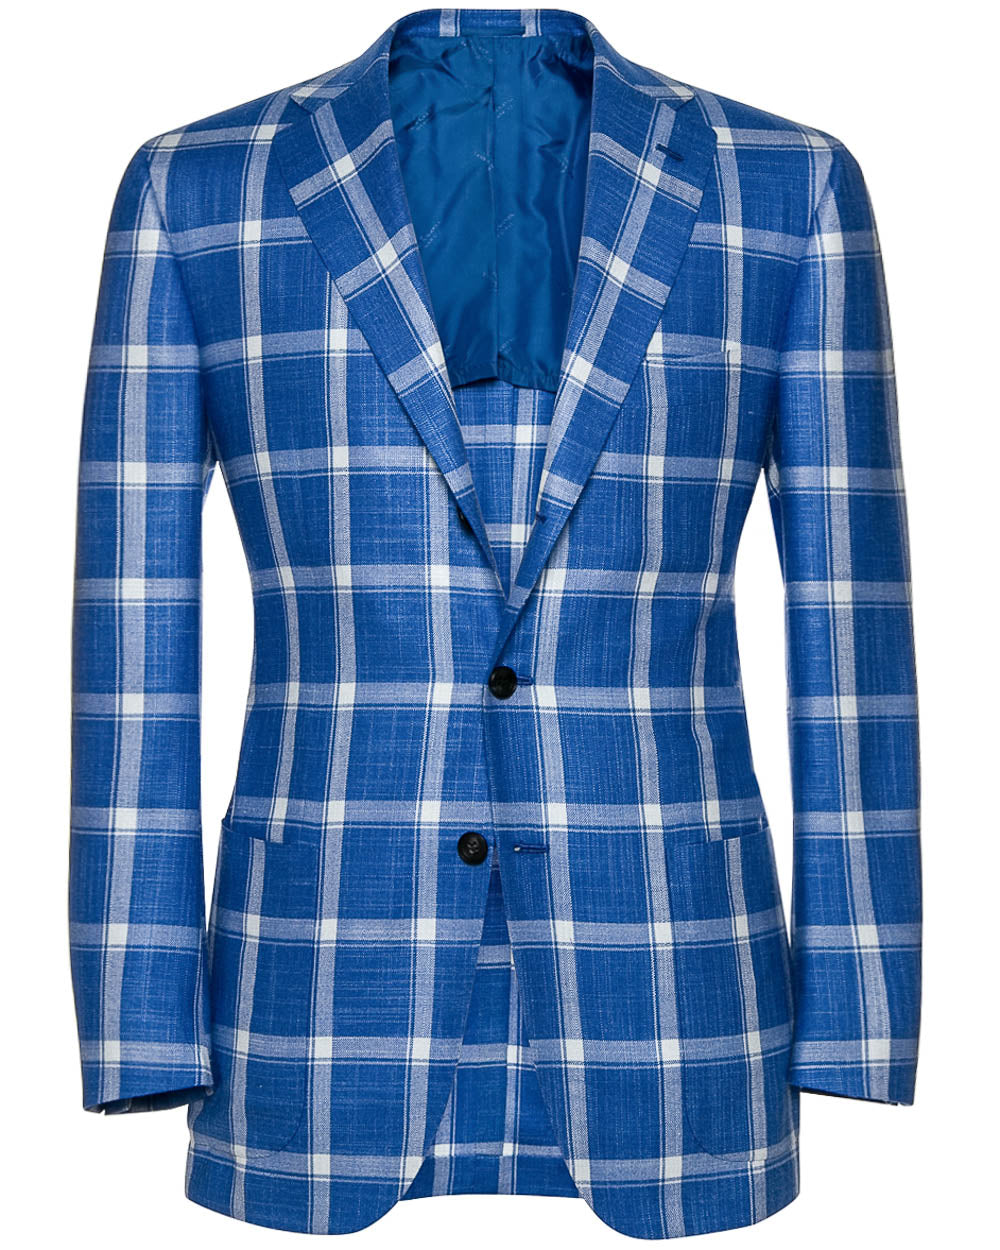 Royal Blue with Silver Overcheck Sportcoat